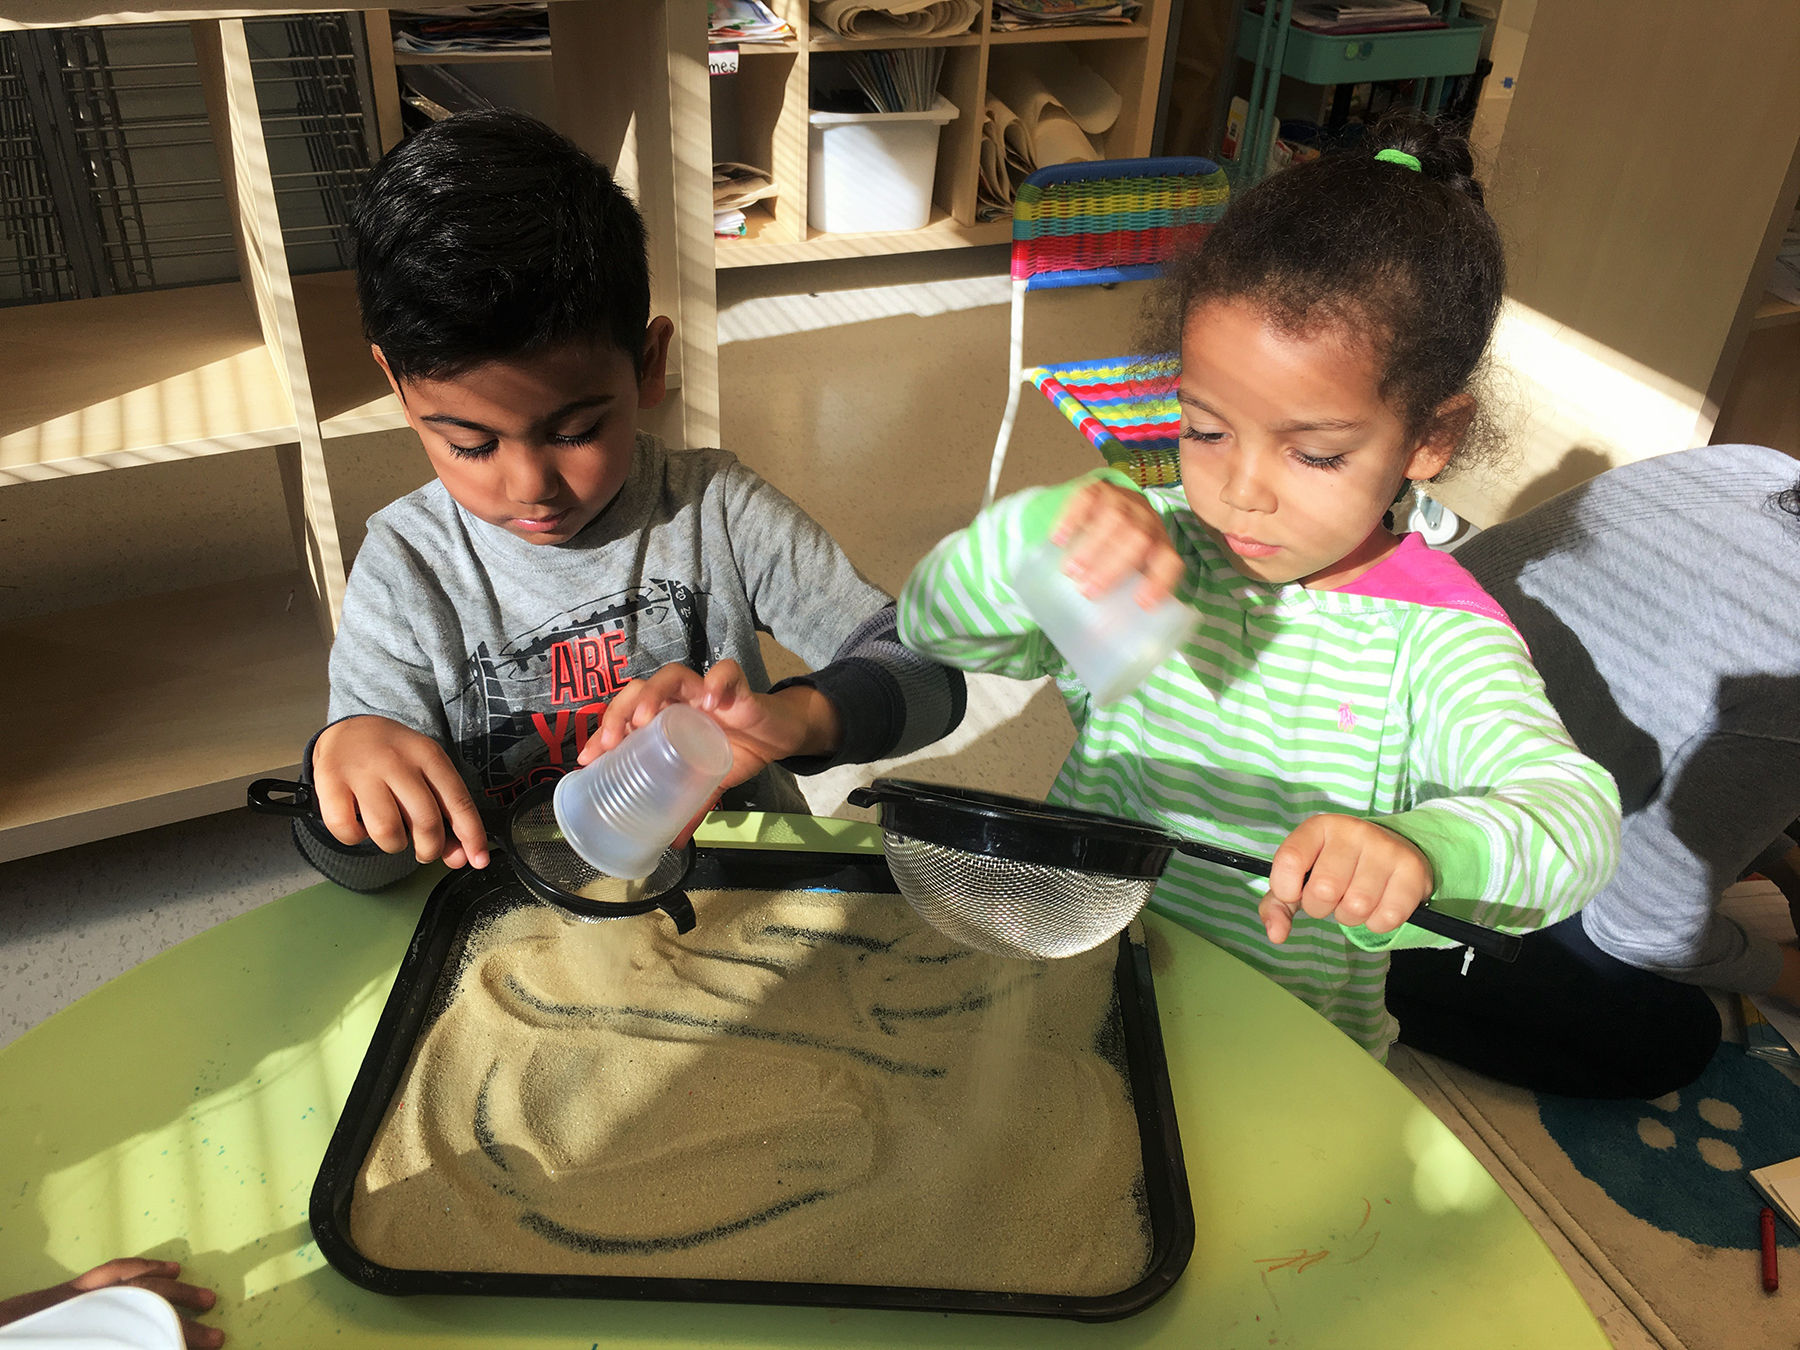 Sensory Play is an important part of learning in the 3 to 6 year age group.